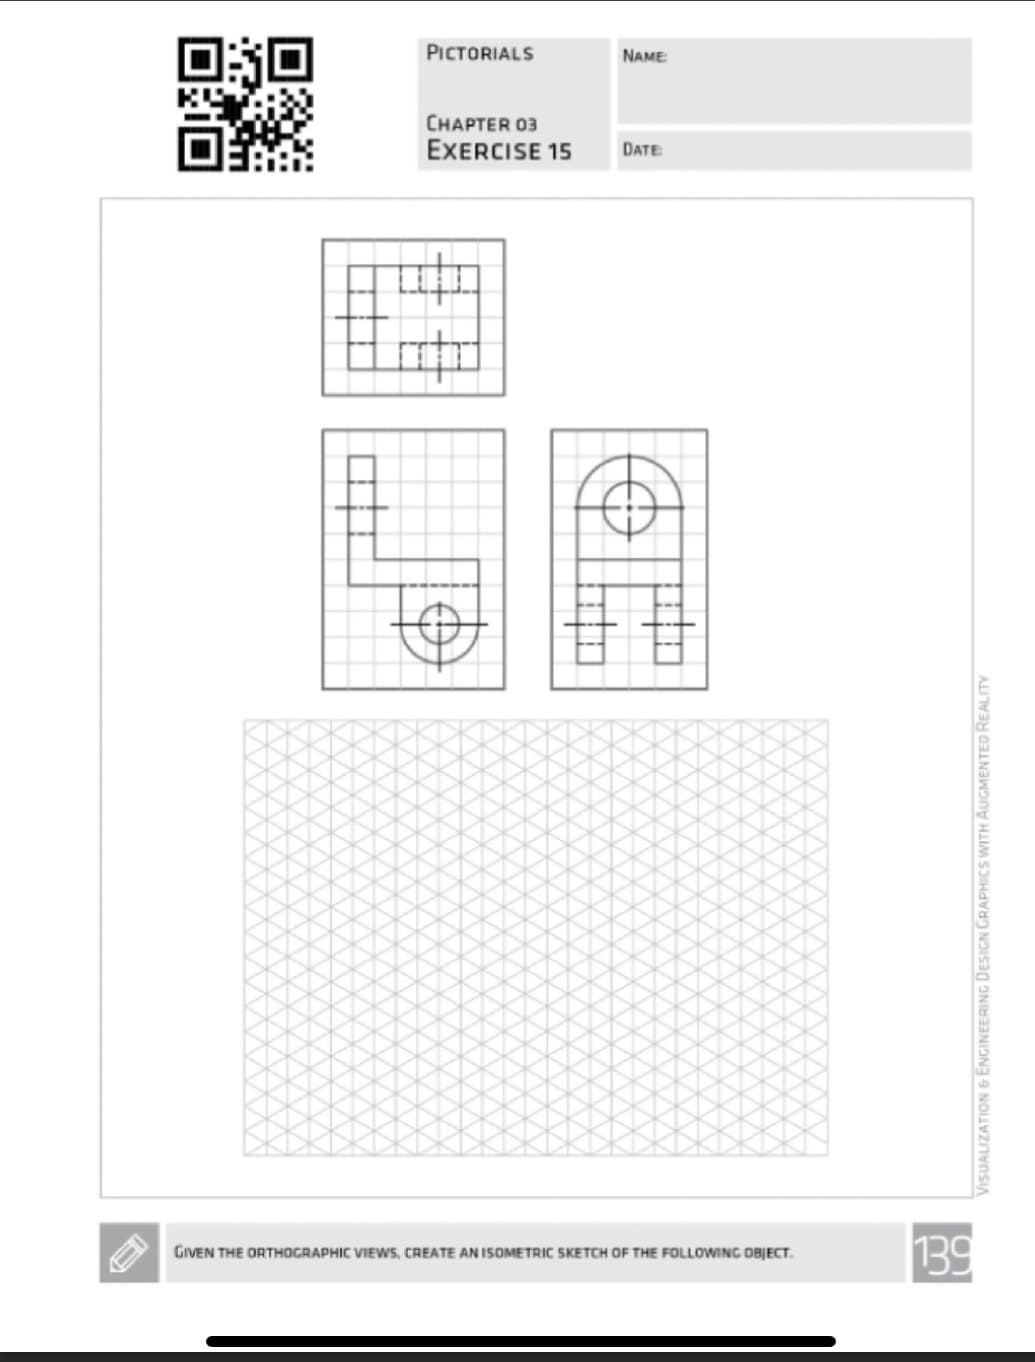 PICTORIALS
CHAPTER 03
EXERCISE 15
#
NAME:
DATE
GIVEN THE ORTHOGRAPHIC VIEWS, CREATE AN ISOMETRIC SKETCH OF THE FOLLOWING OBJECT.
130
VISUALIZATION & ENGINEERING DESIGN GRAPHICS WITH AUGMENTED REALITY